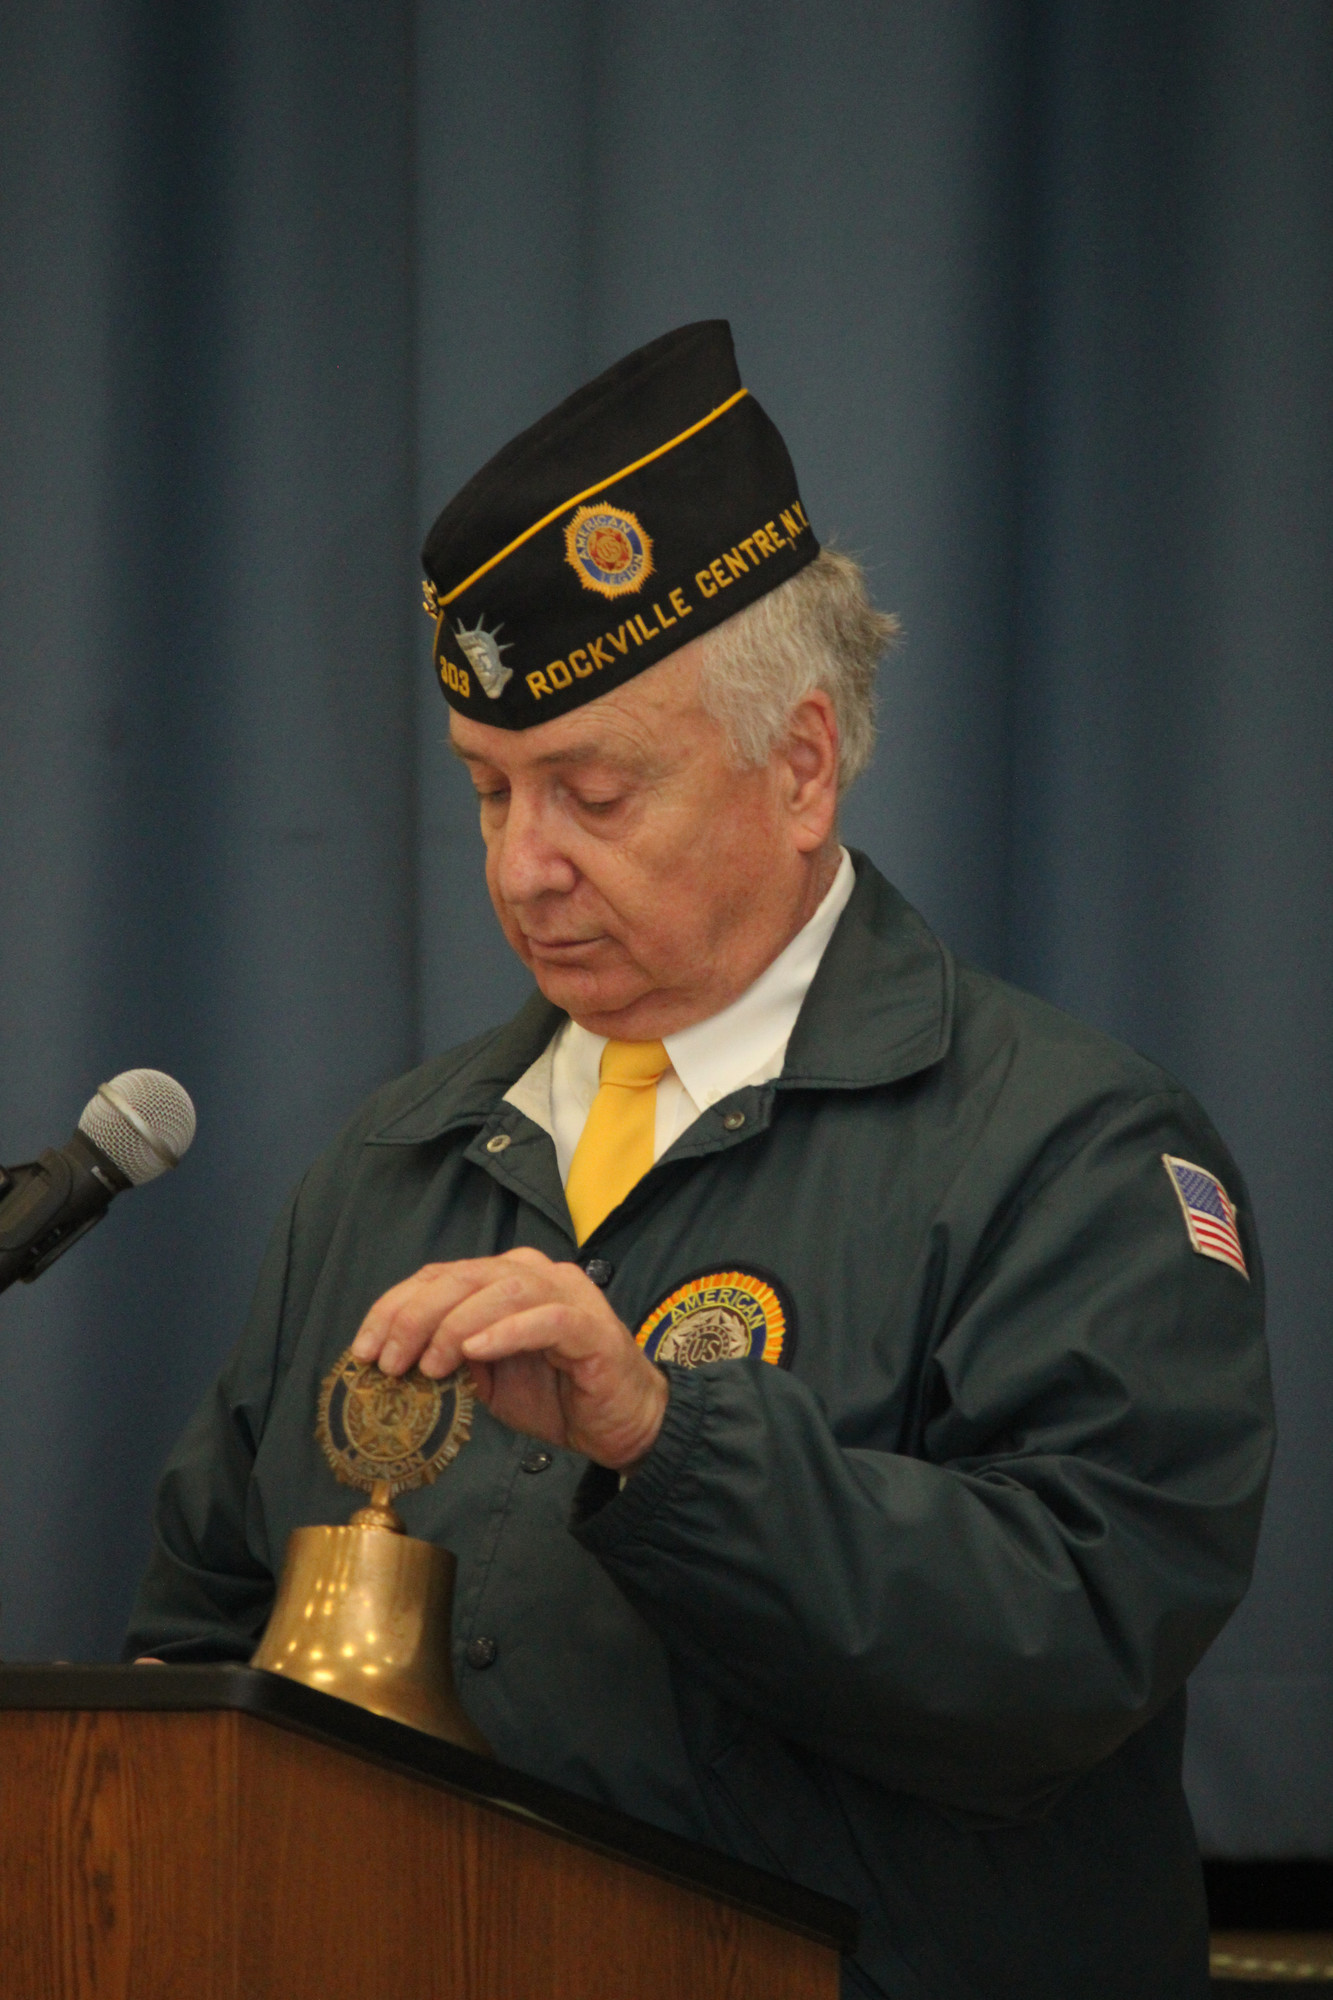 American Legion Post Commander Joseph Scarola rang the bell at 11:11 a.m., marking the time at which World War I ended.